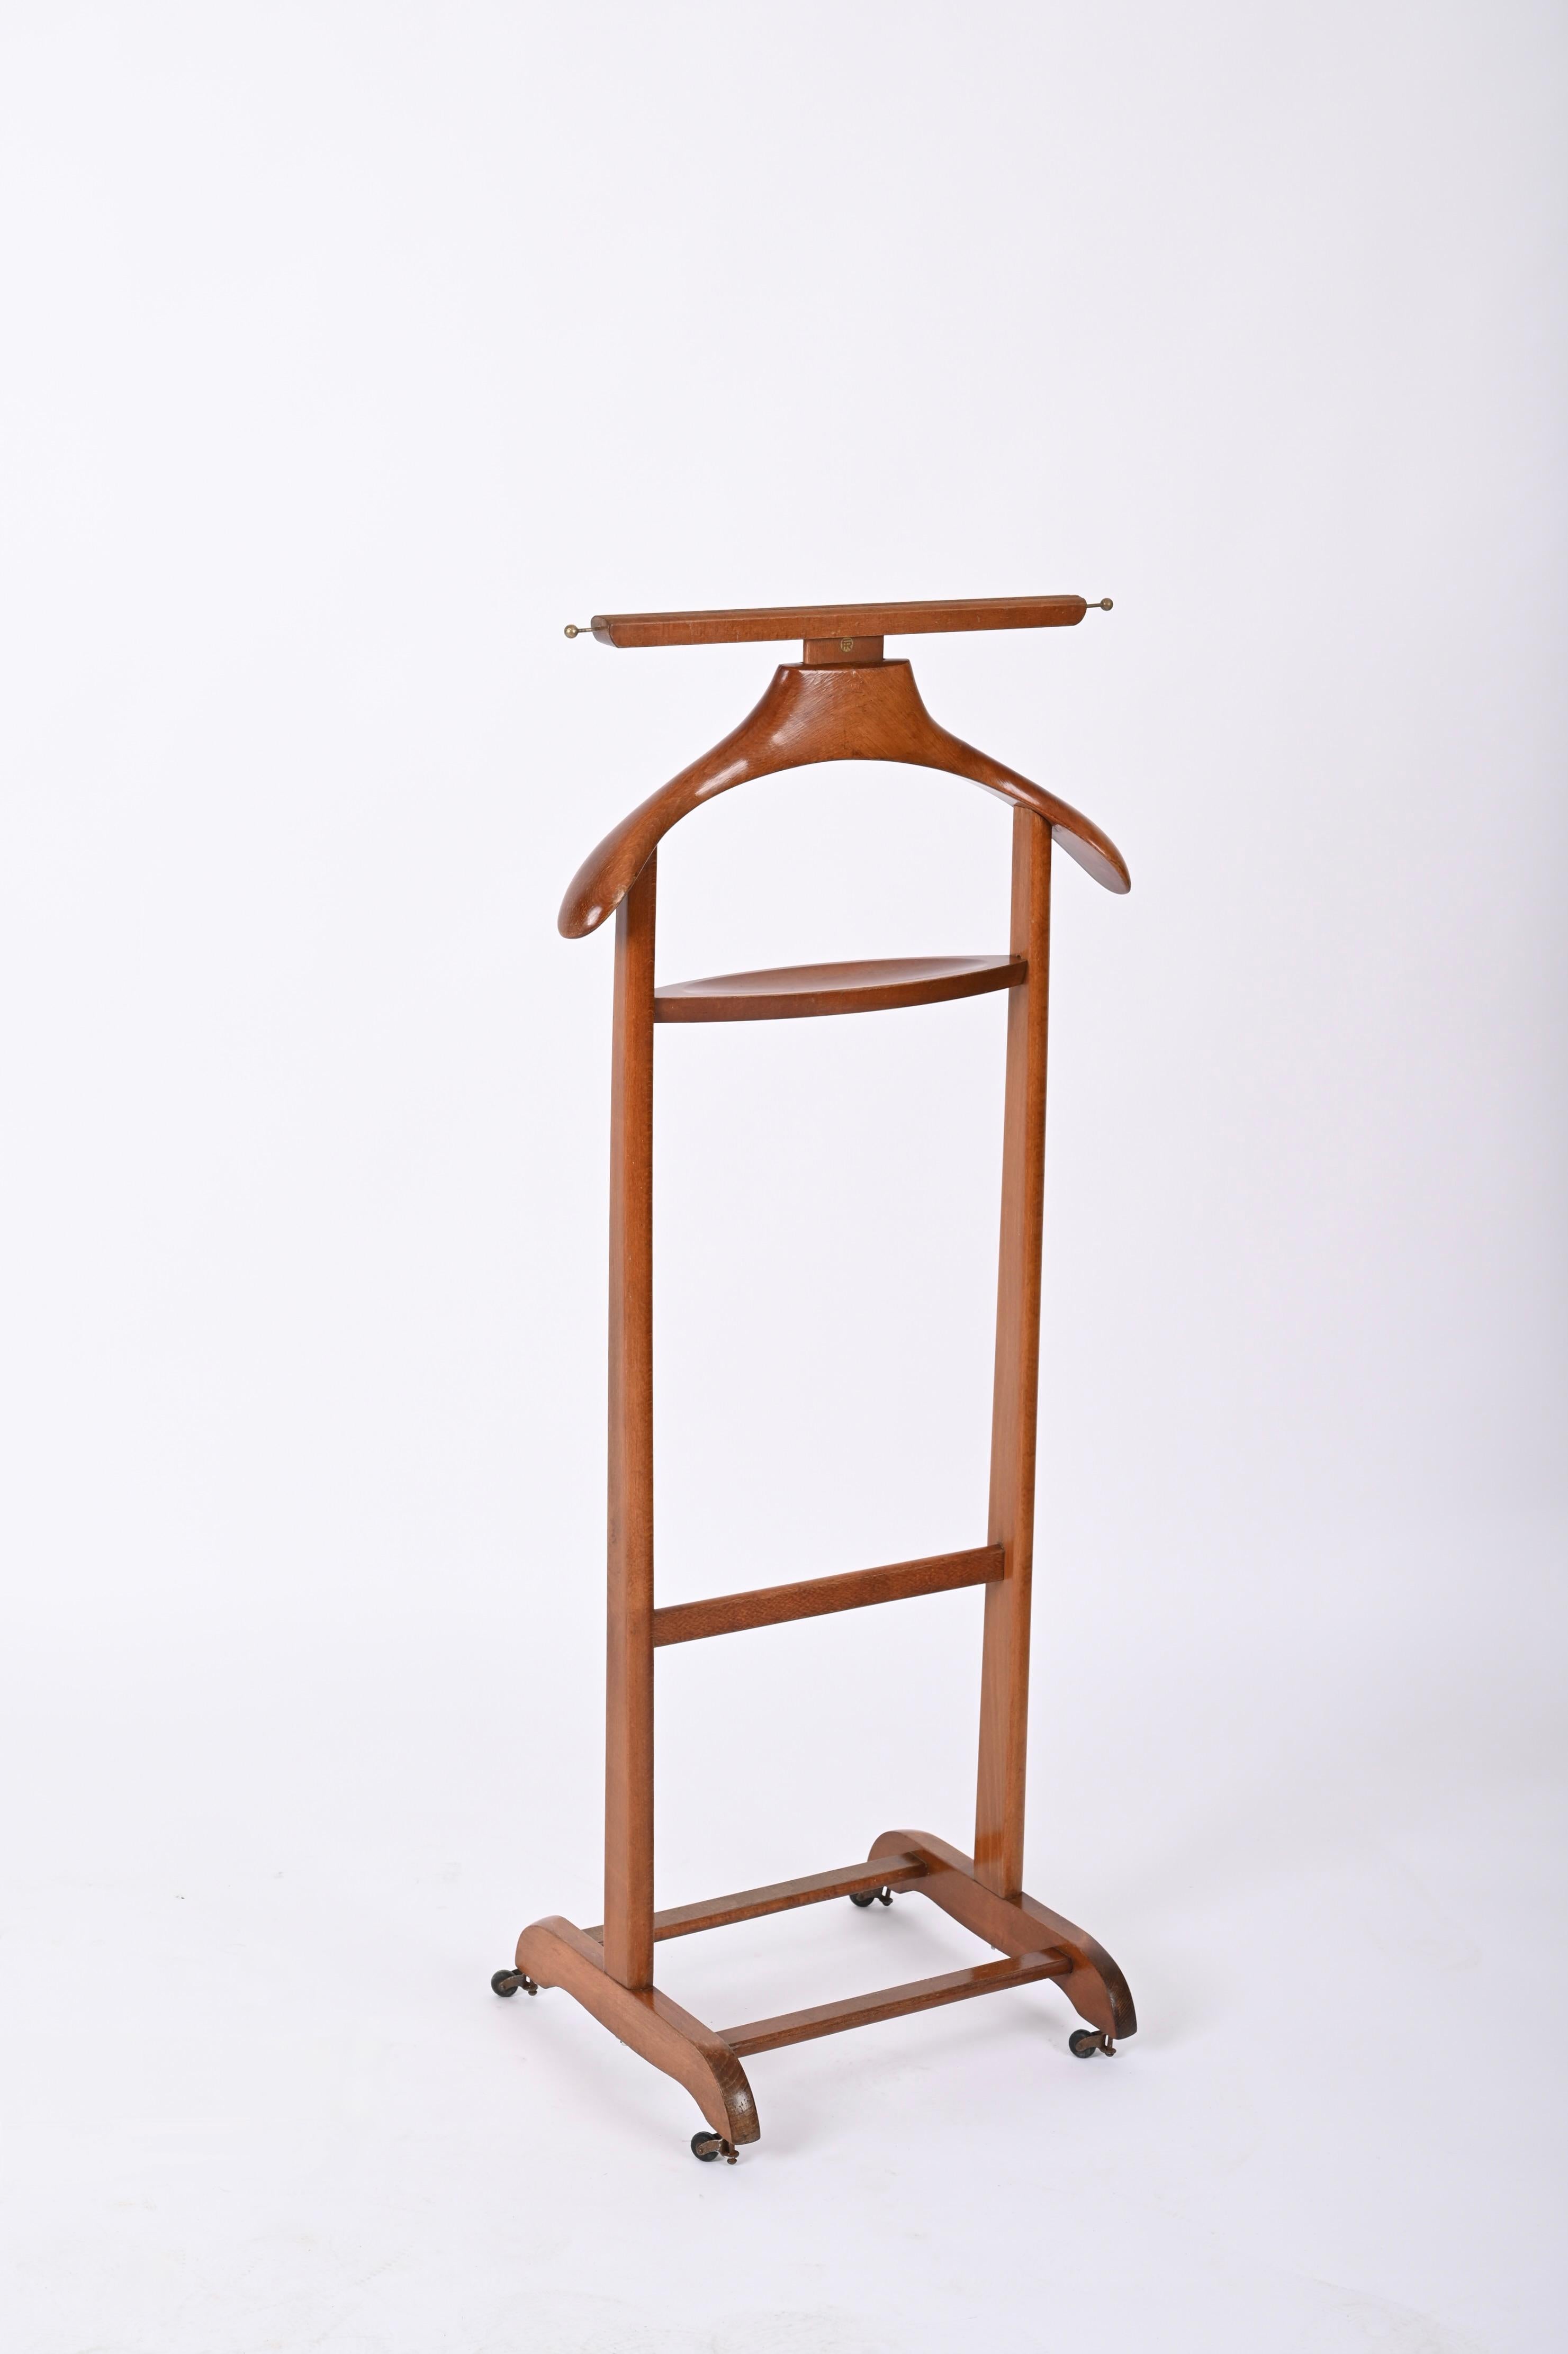 Very rare midcentury valet stand in beech and brass. This gorgeous item was produced during the 1950s by the Reguitti Brothers in Italy.

This unique coat rack is made of beechwood and features two solid brass hooks for belts or ties. The contrast